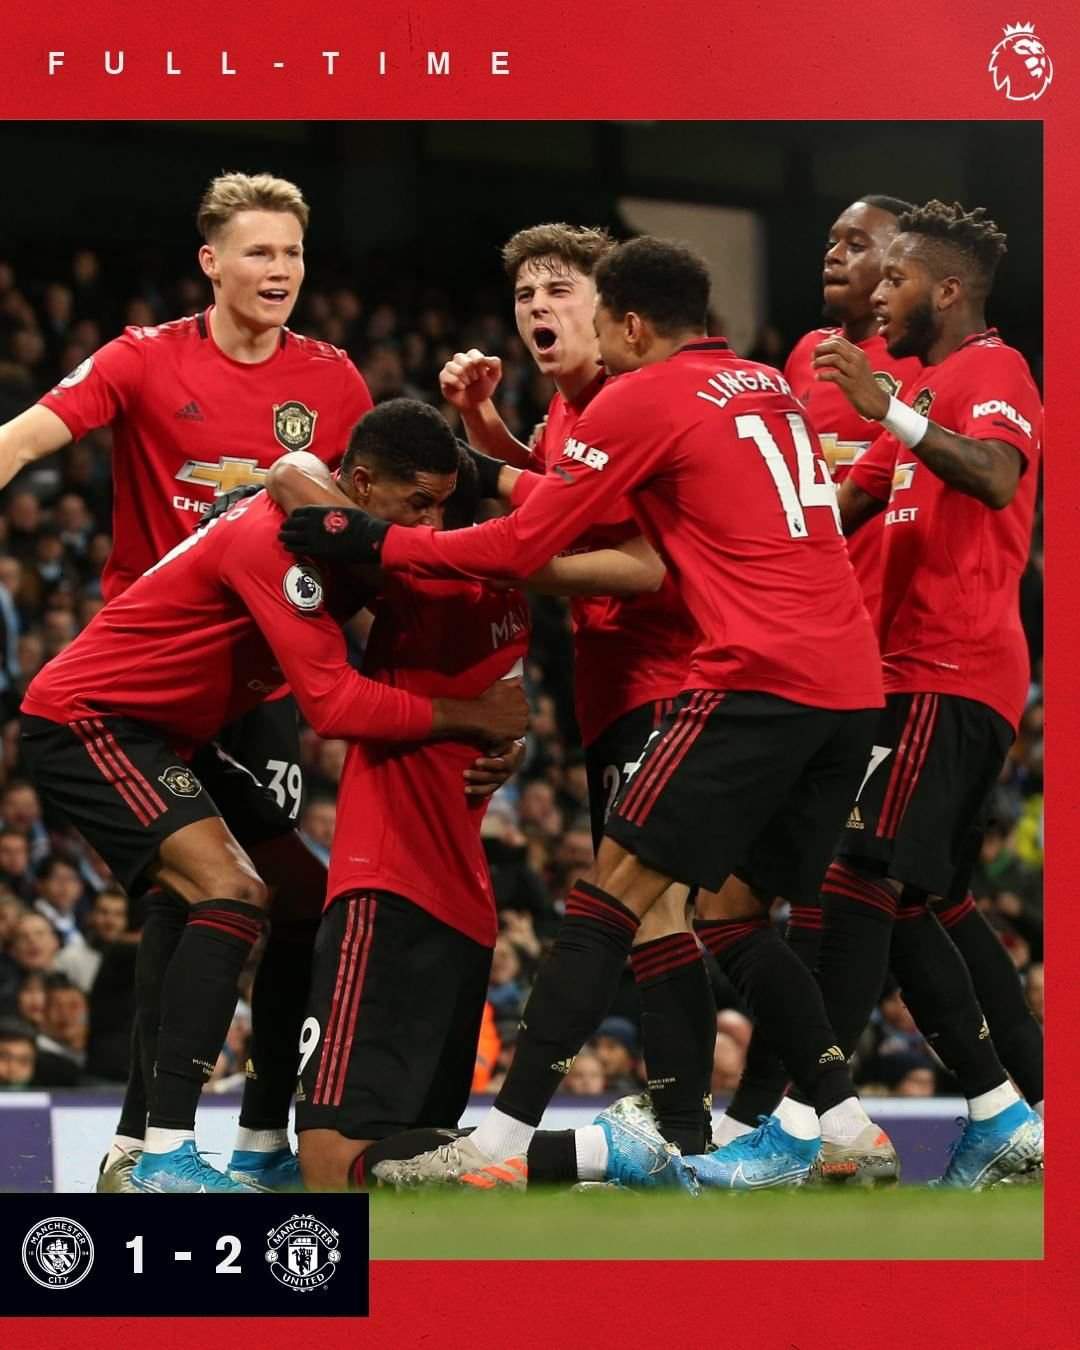 download glory glory manchester united